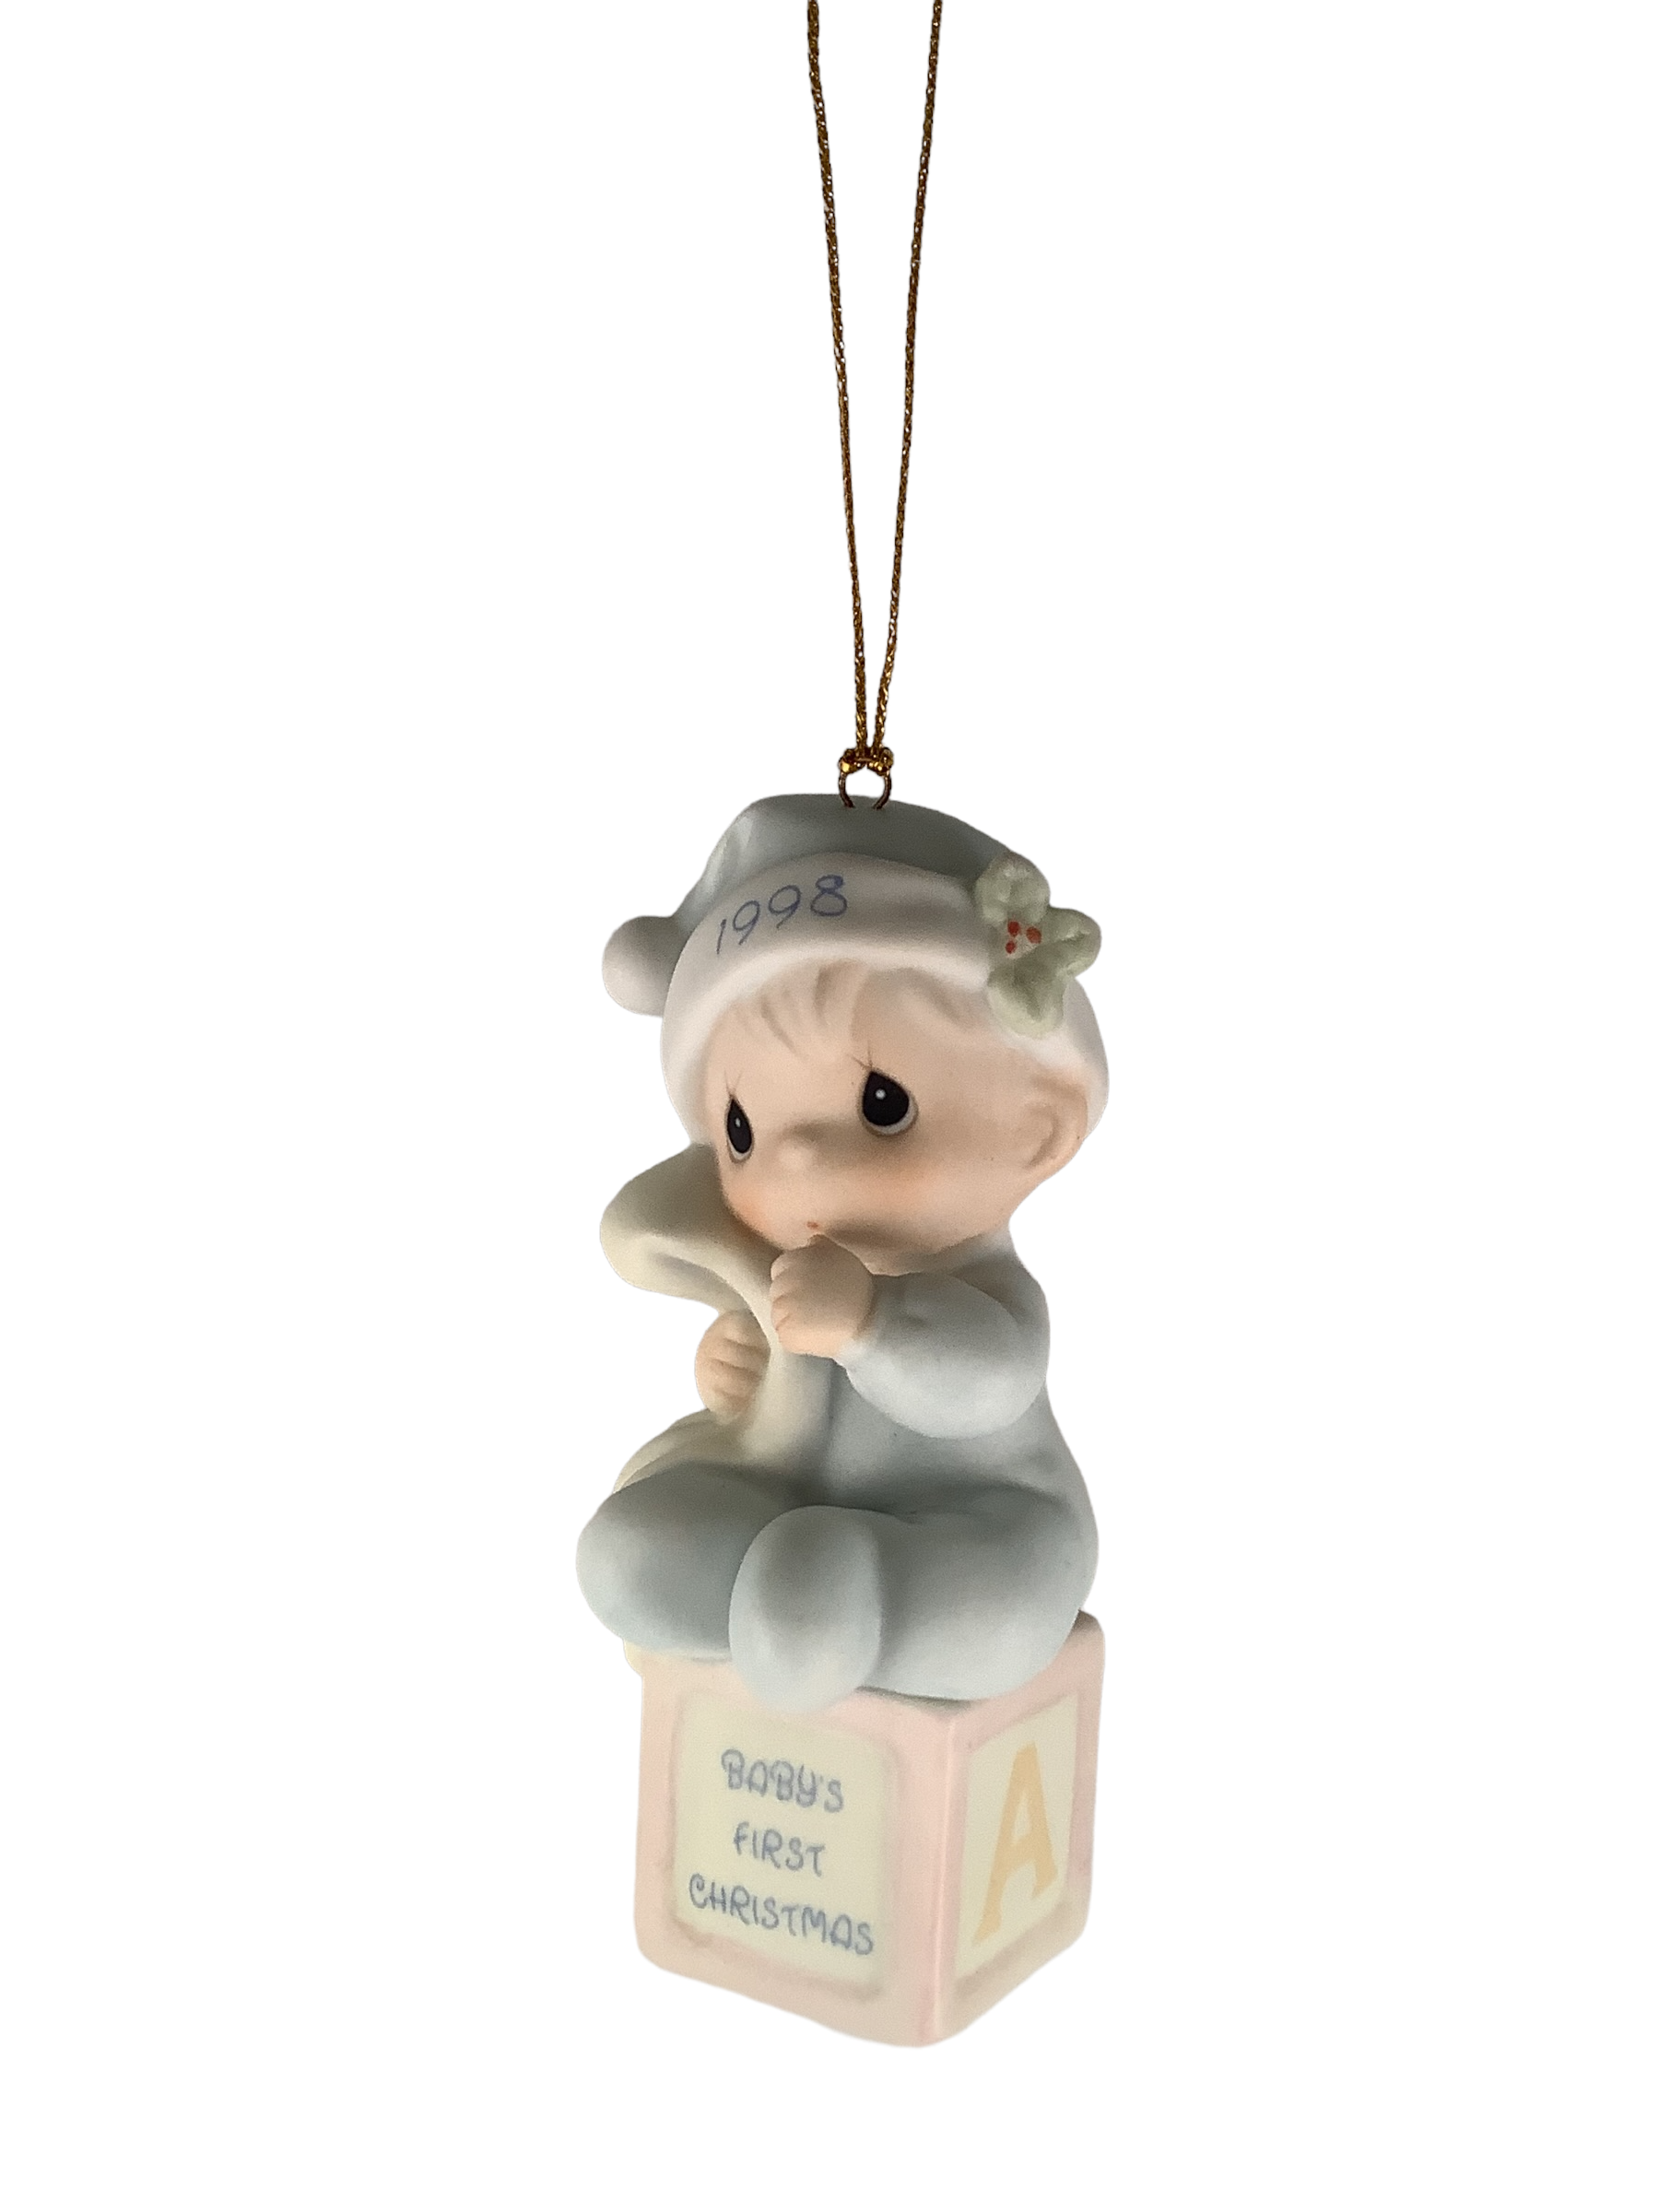 Baby's First Christmas 1998 (Boy) - Precious Moment Ornament